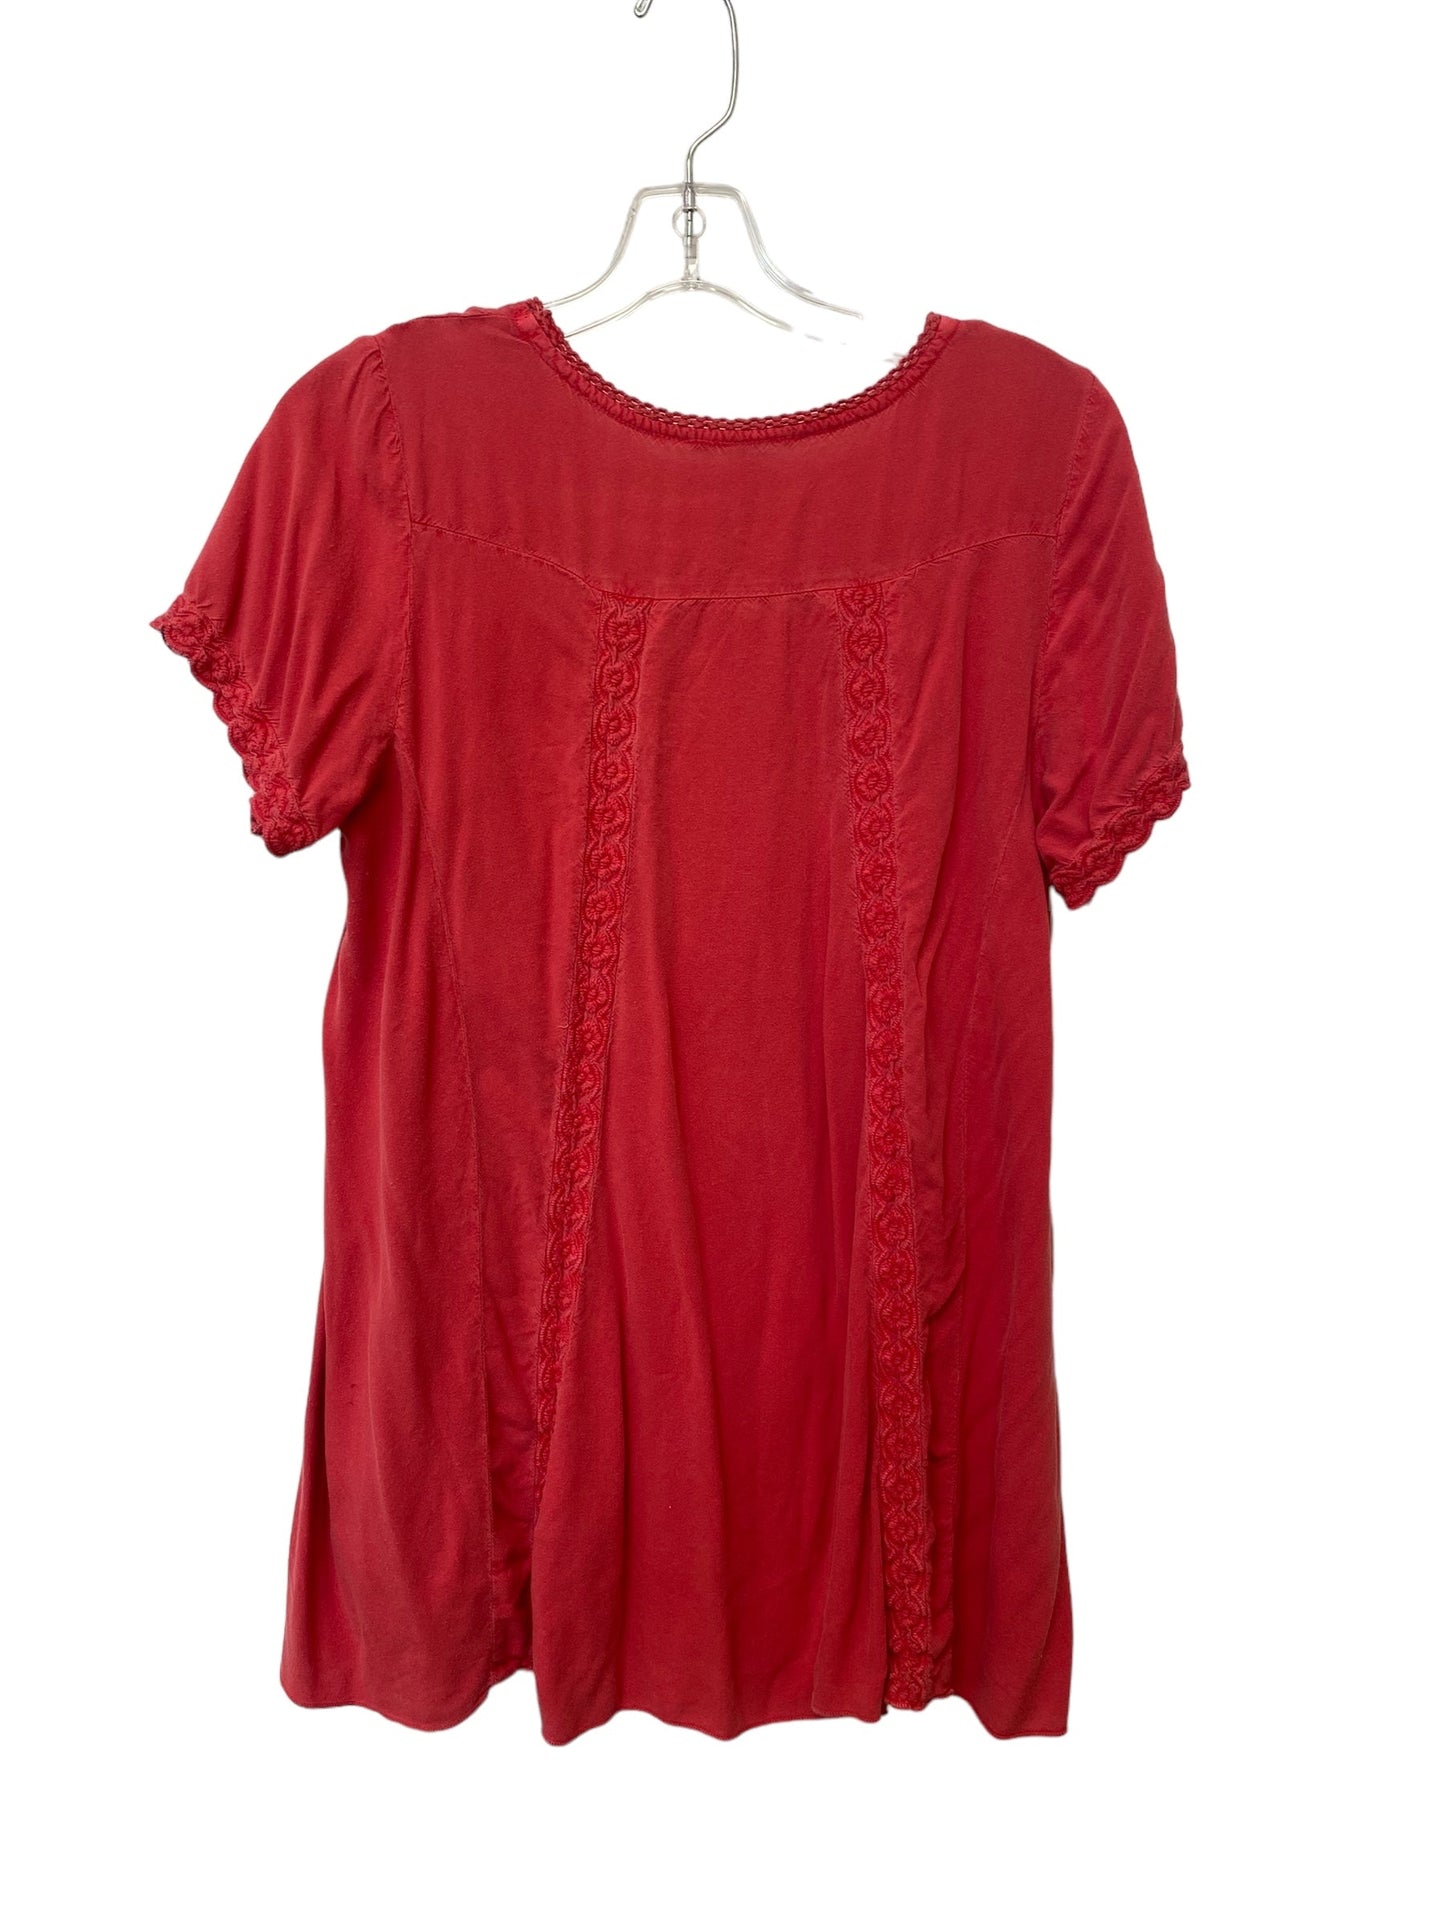 Red Top Short Sleeve Soft Surroundings, Size M